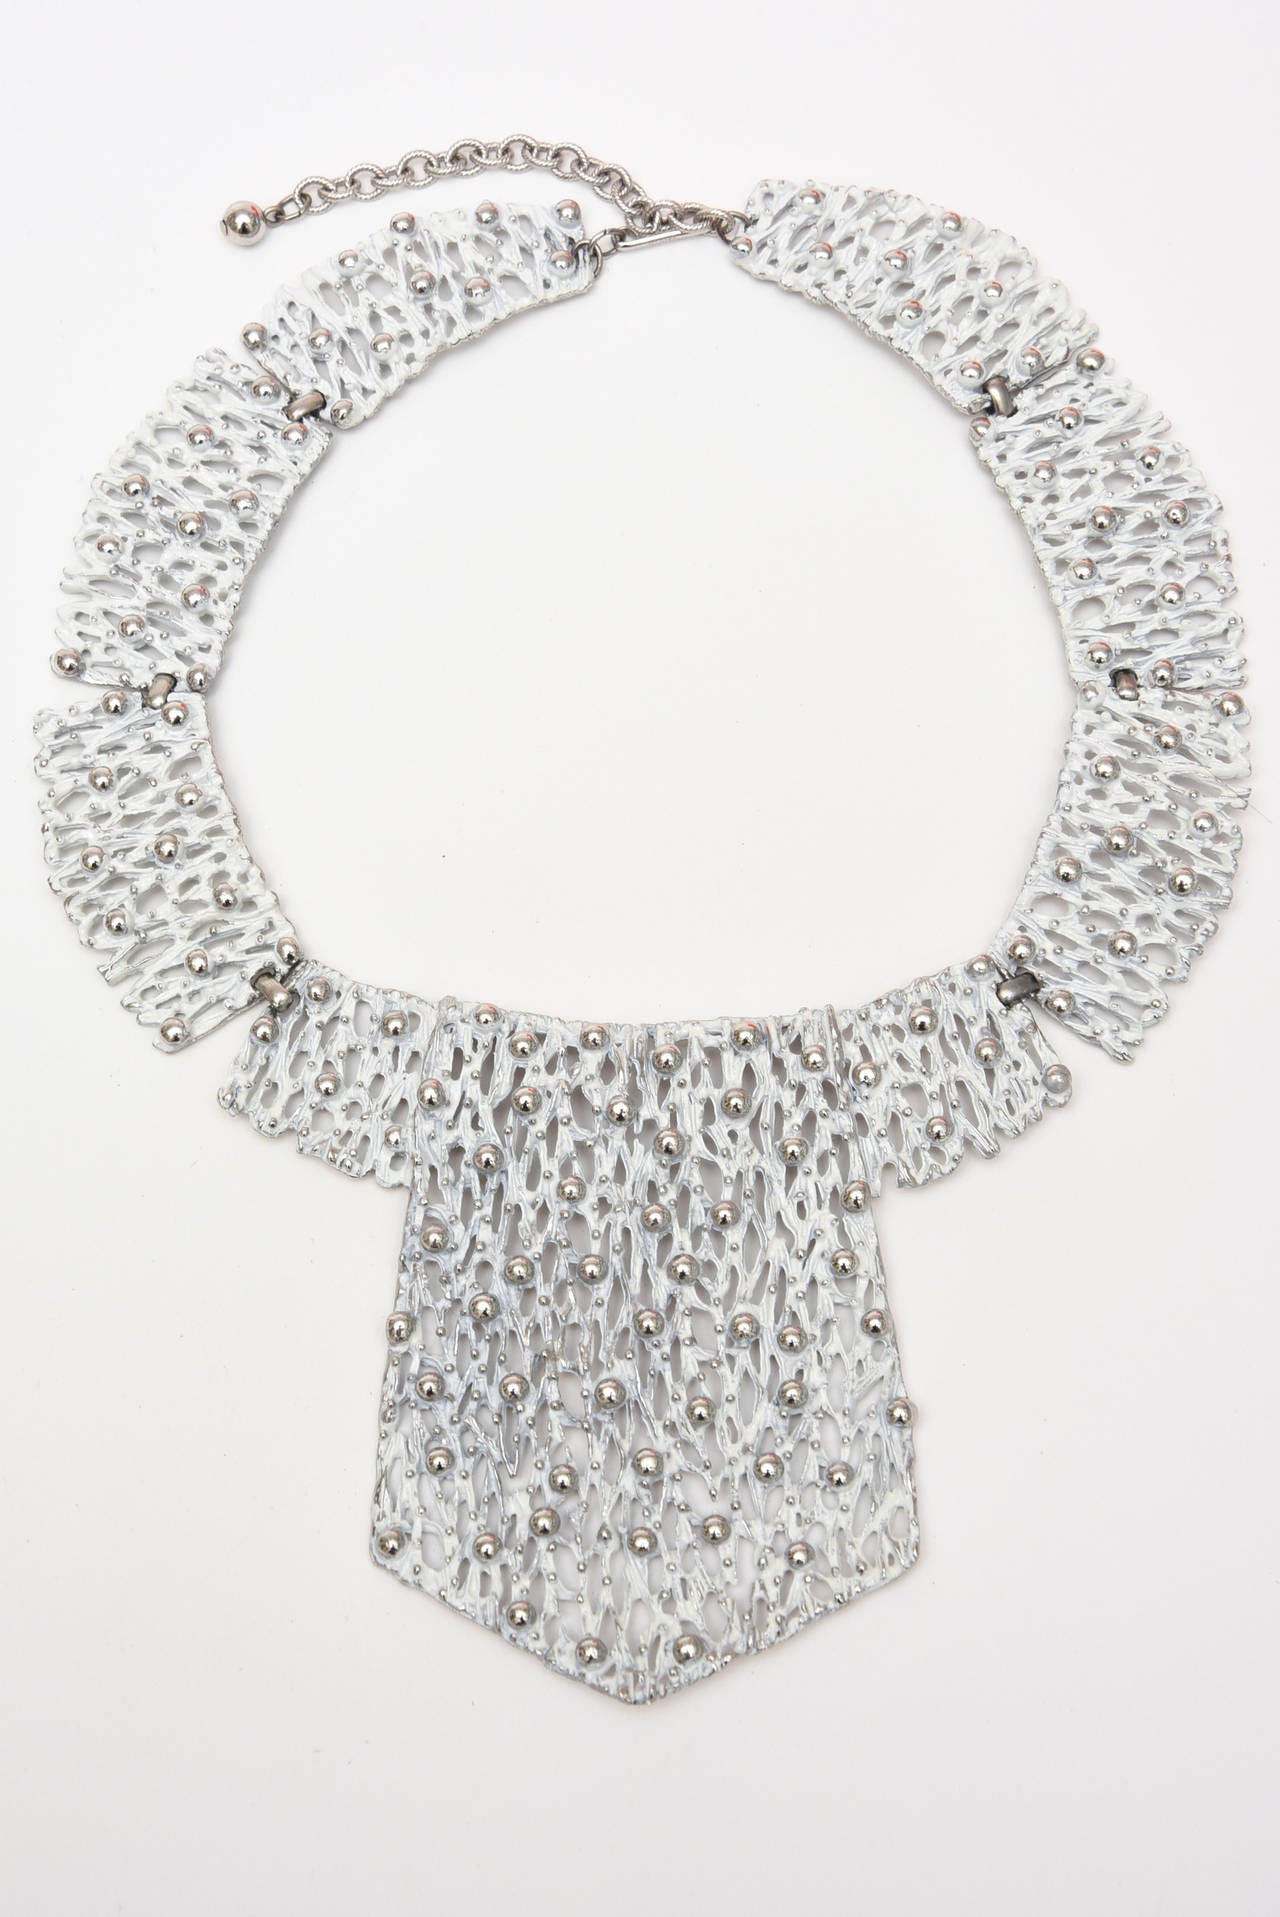 Looks like clusters of ice encased in texture and molten white metal in this Napier hard to find set of a collar necklace and matching clip on earrings.
There are tiny chrome plated balls randomly placed all over the necklace and earrings.
A show